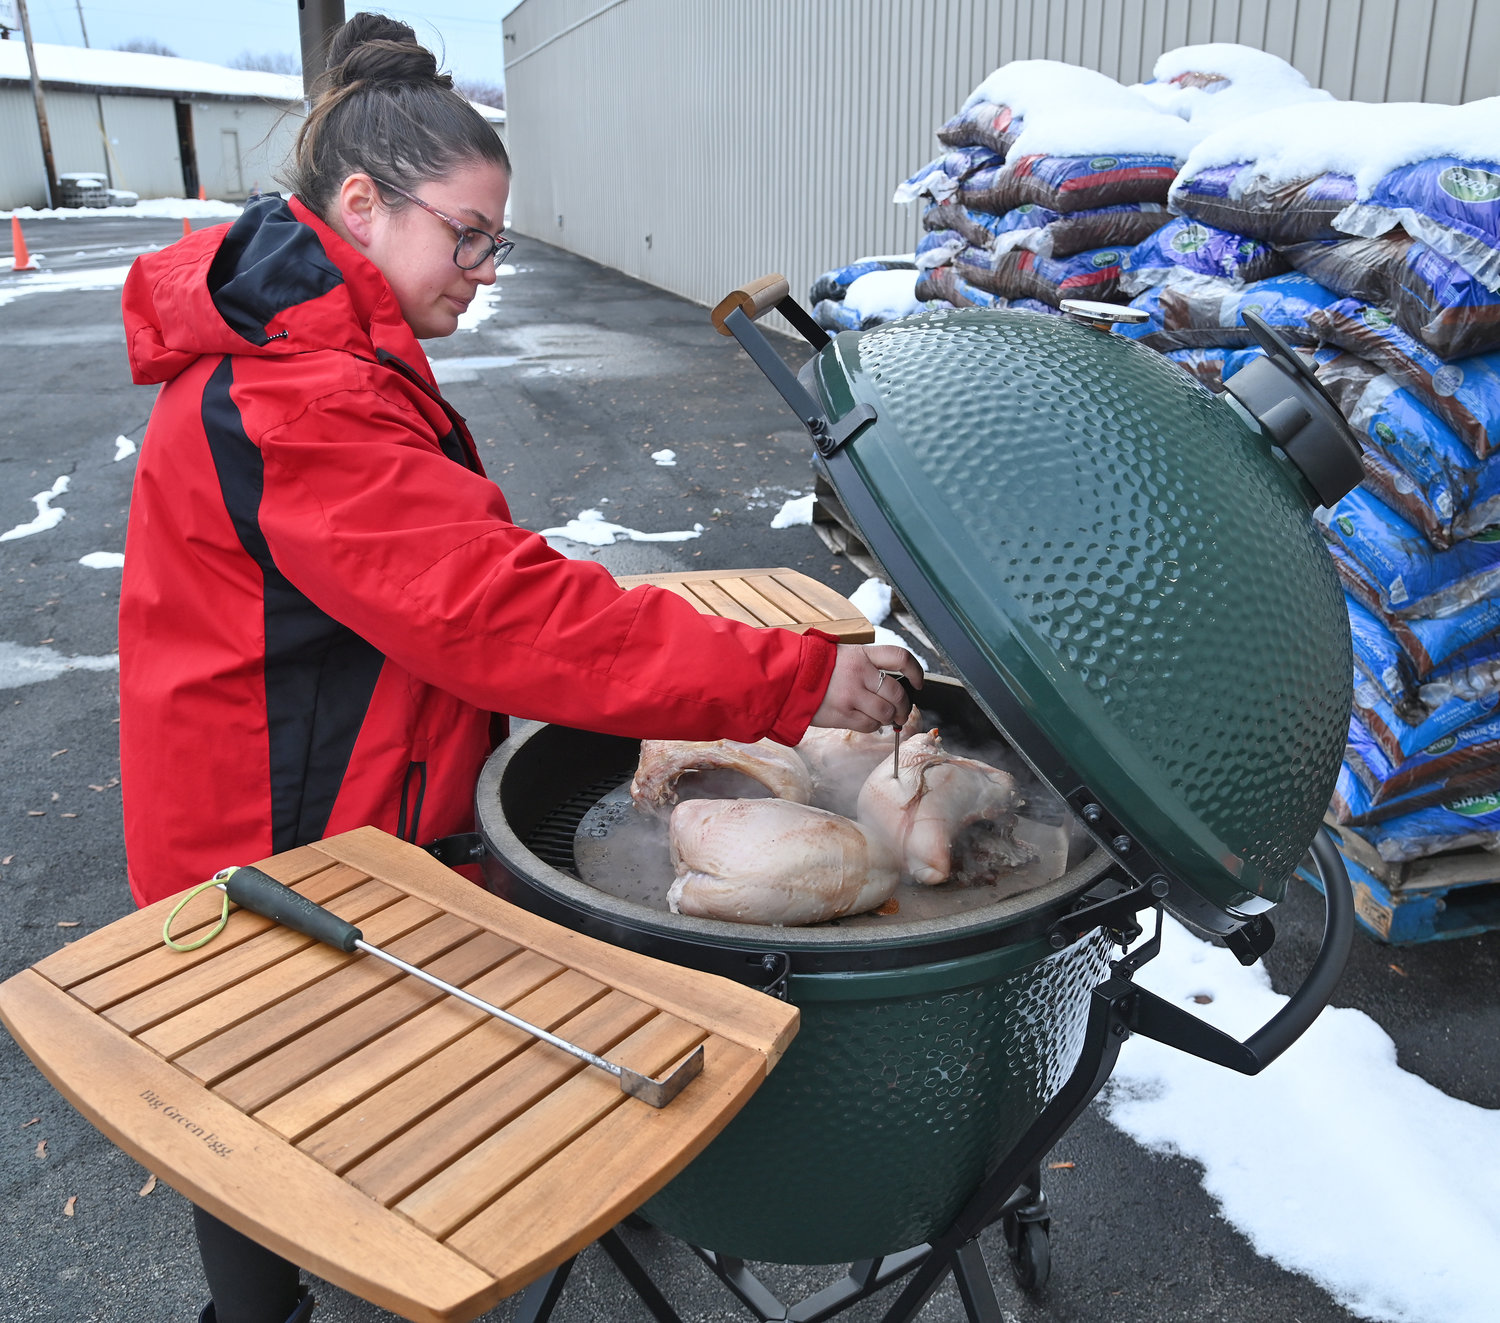 HAPPY THANKSGRILLING! — Alex Bauer, a supervisor at ACE Hardware, 115 Black River Blvd. South, checks some turkey breasts cooking in the Big Green Egg smoker at the store Friday, Nov. 18. The store and its staff will welcome customers to celebrate Thanksgrilling Saturday, Nov. 19 from 11 a.m. to 2 p.m. During the event, turkey sliders will be available along with Apple Cinnamon cups and ACE Famous Popcorn featuring different rubs.